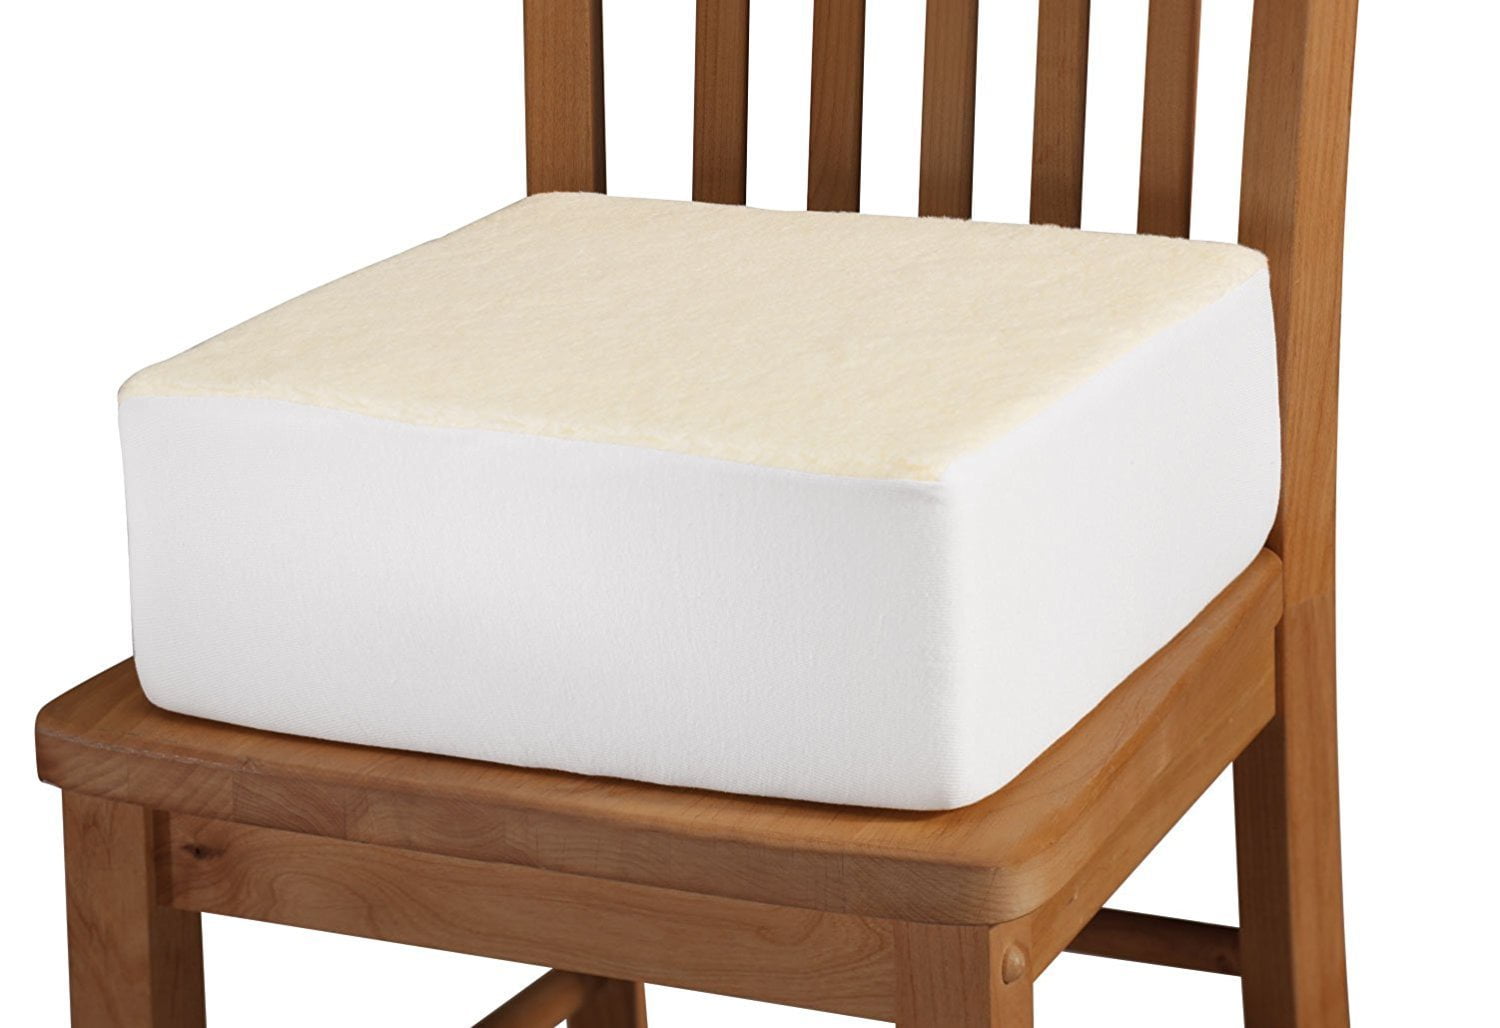 extra thick foam workout mattress for sale